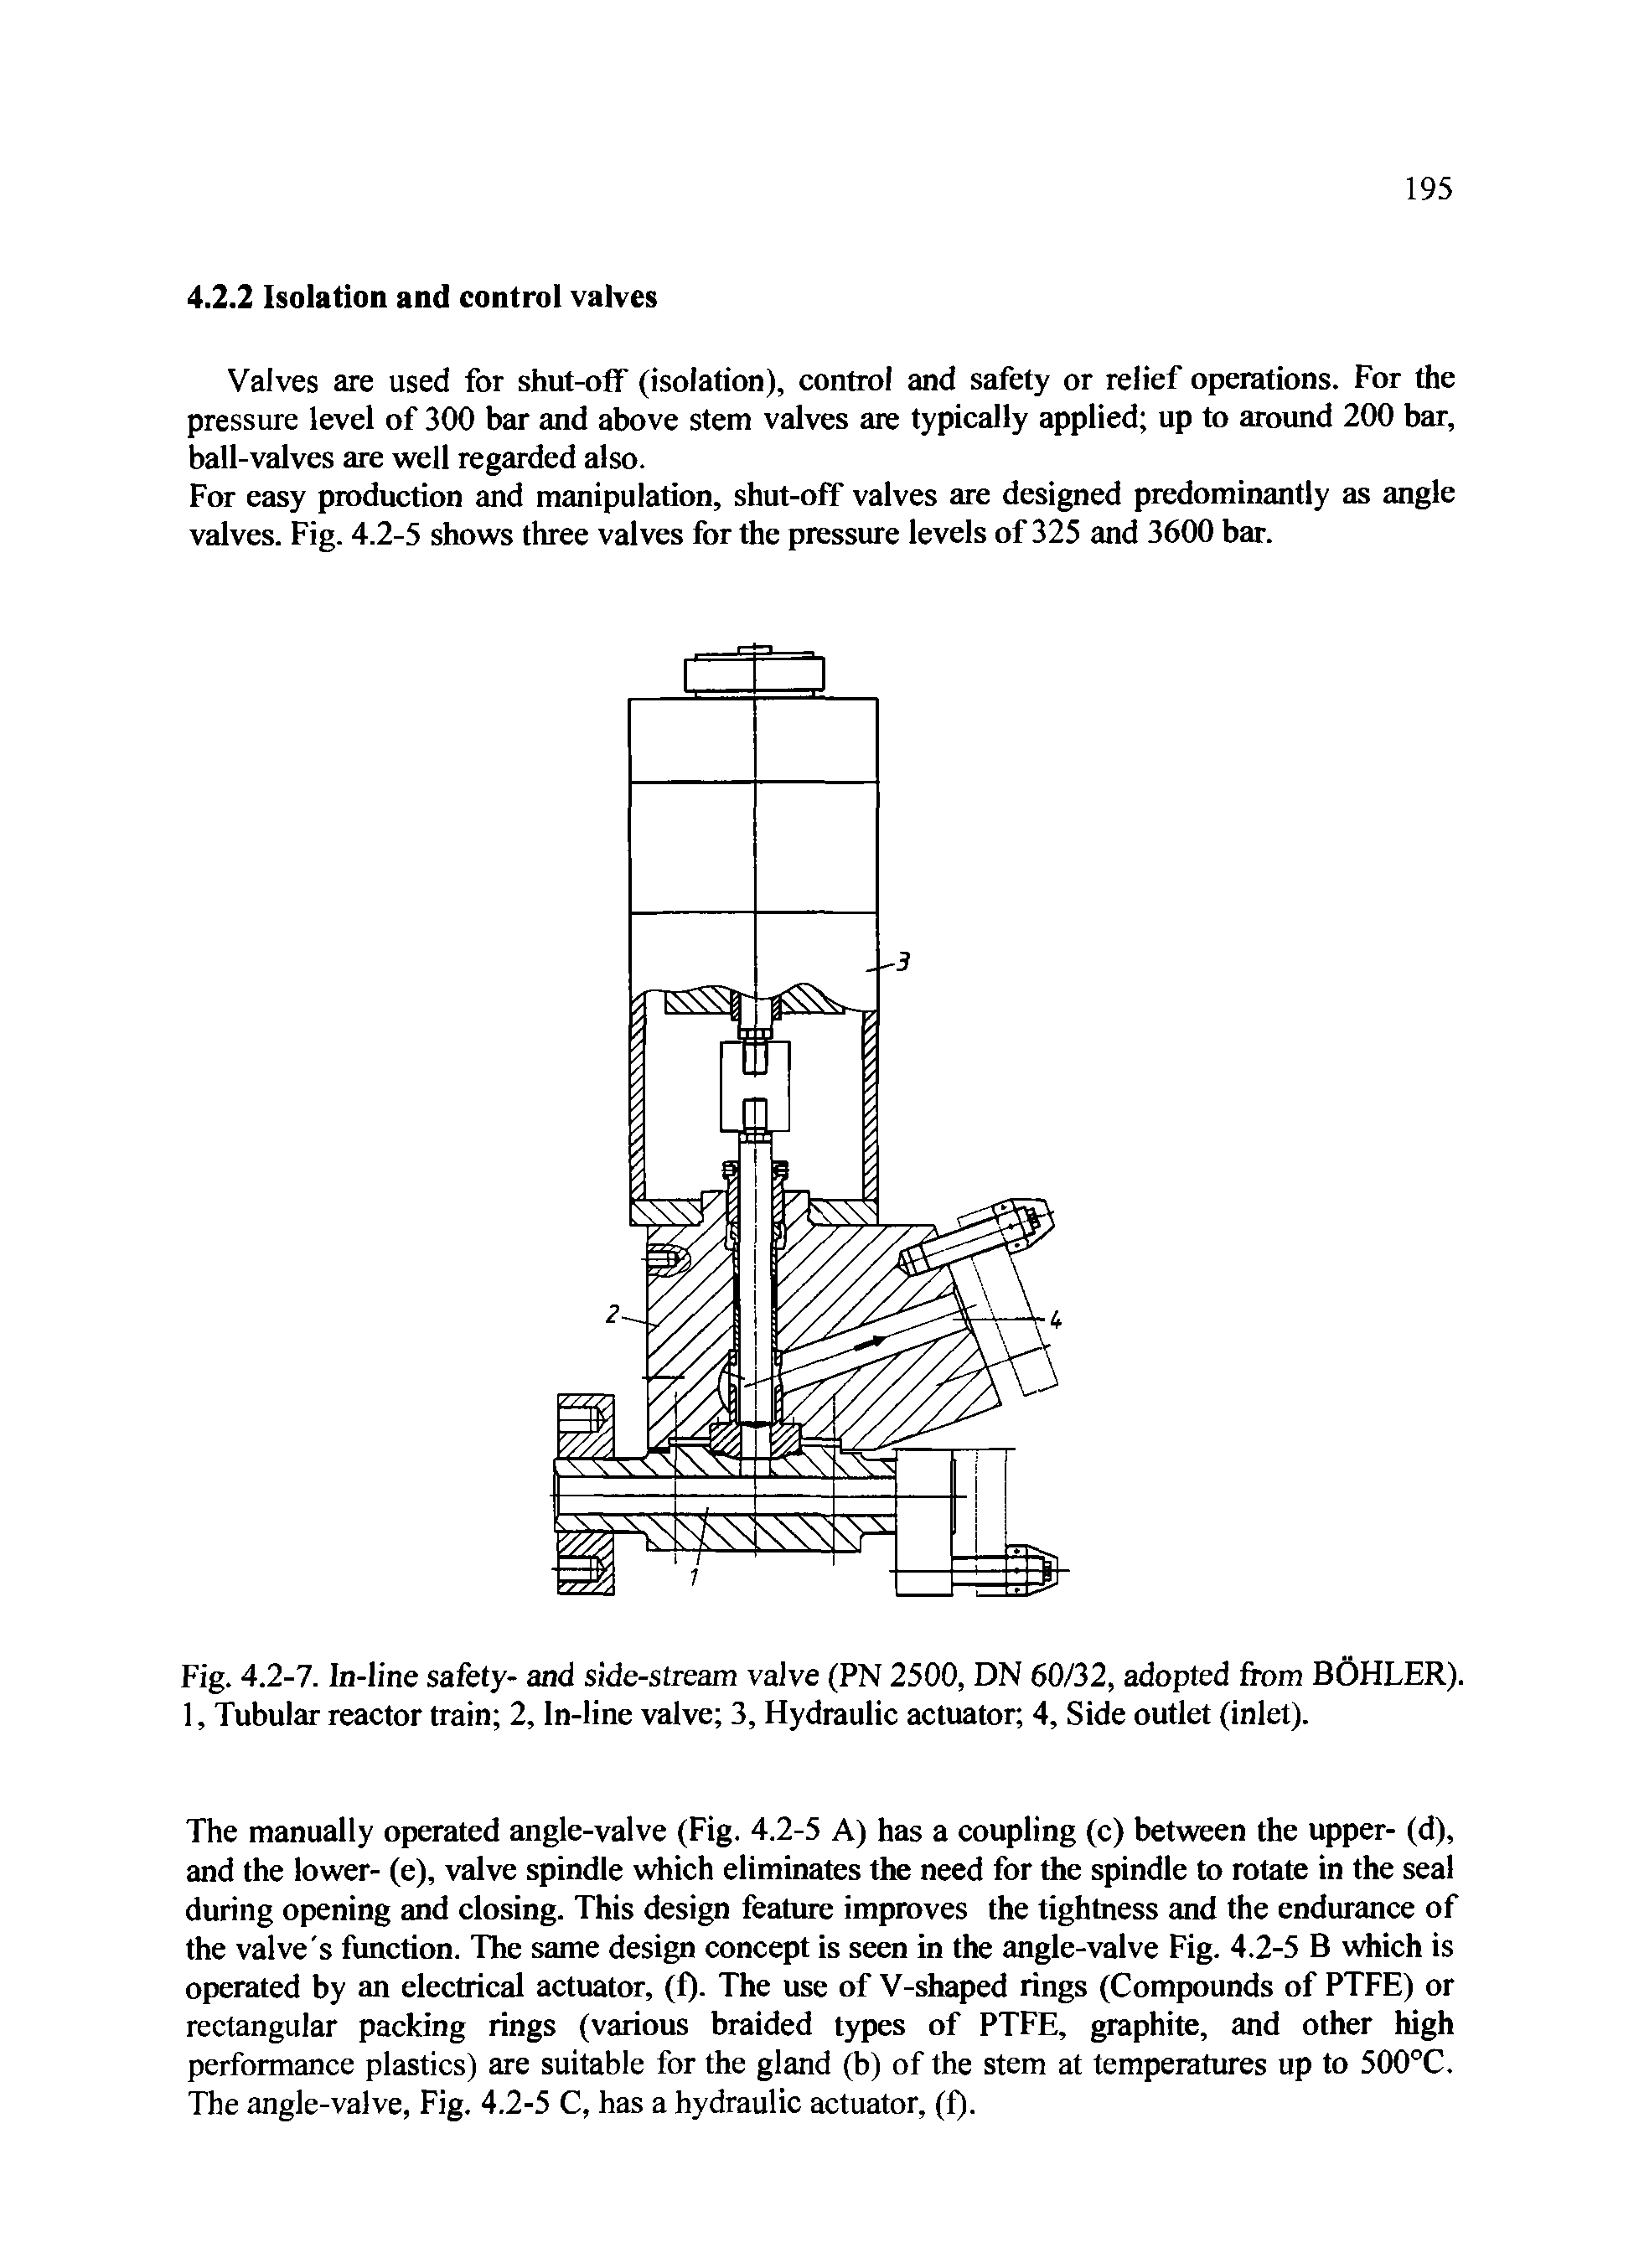 Fig. 4.2-7. In-line safety- and side-stream valve (PN 2500, DN 60/32, adopted from BOHLER). 1, Tubular reactor train 2, In-line valve 3, Hydraulic actuator 4, Side outlet (inlet).